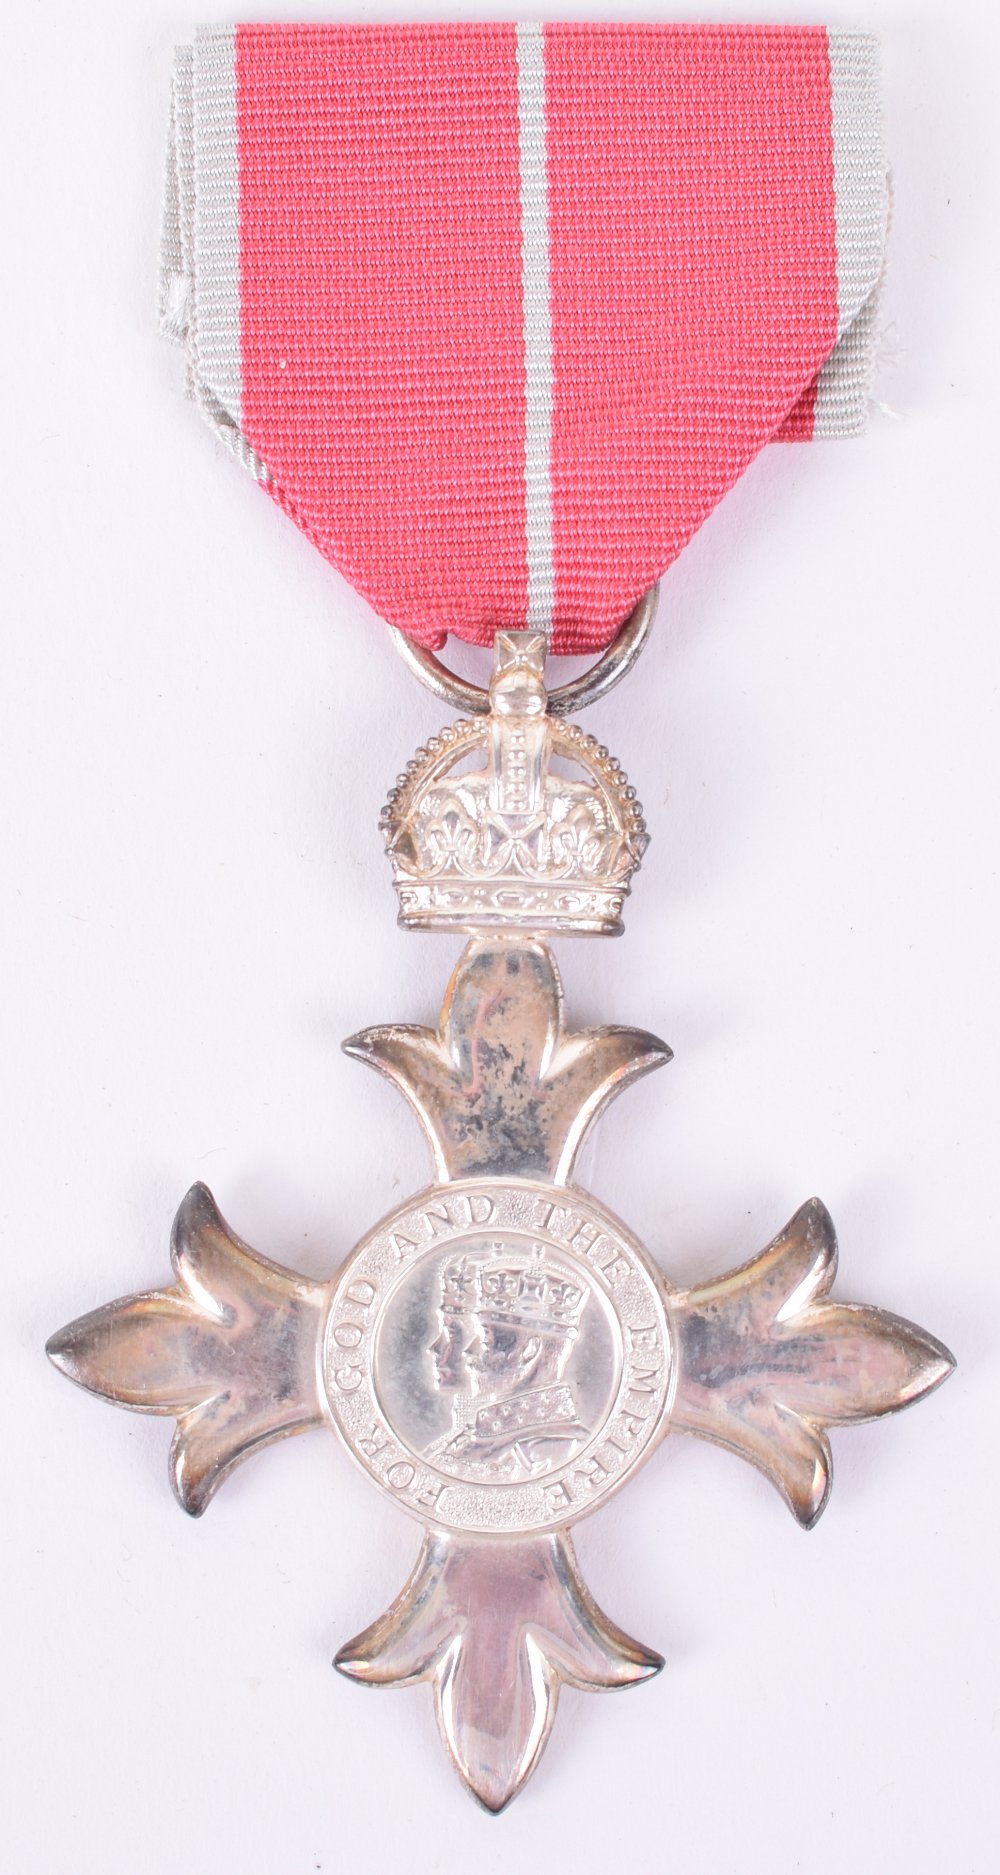 Member of the Most Excellent Order of the British Empire (M.B.E) Medal